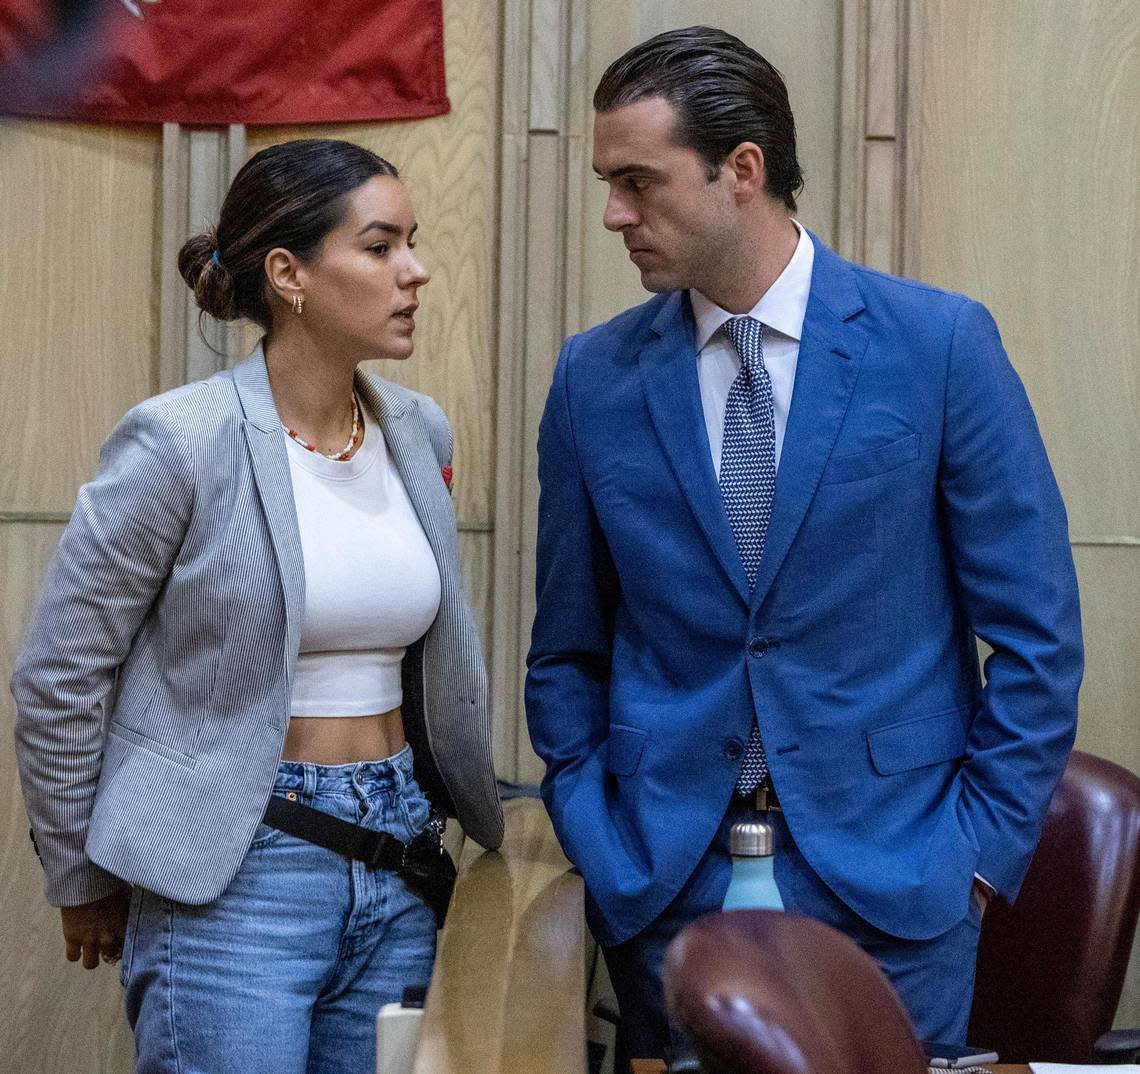 Pablo Lyle, right, talks to his wife, Ana Araujo, left, in Miami-Dade Criminal Court on Oct. 4, 2022. Pablo Lyle is accused of killing 63-year-old Juan Ricardo Hernandez during a road rage incident in 2019.